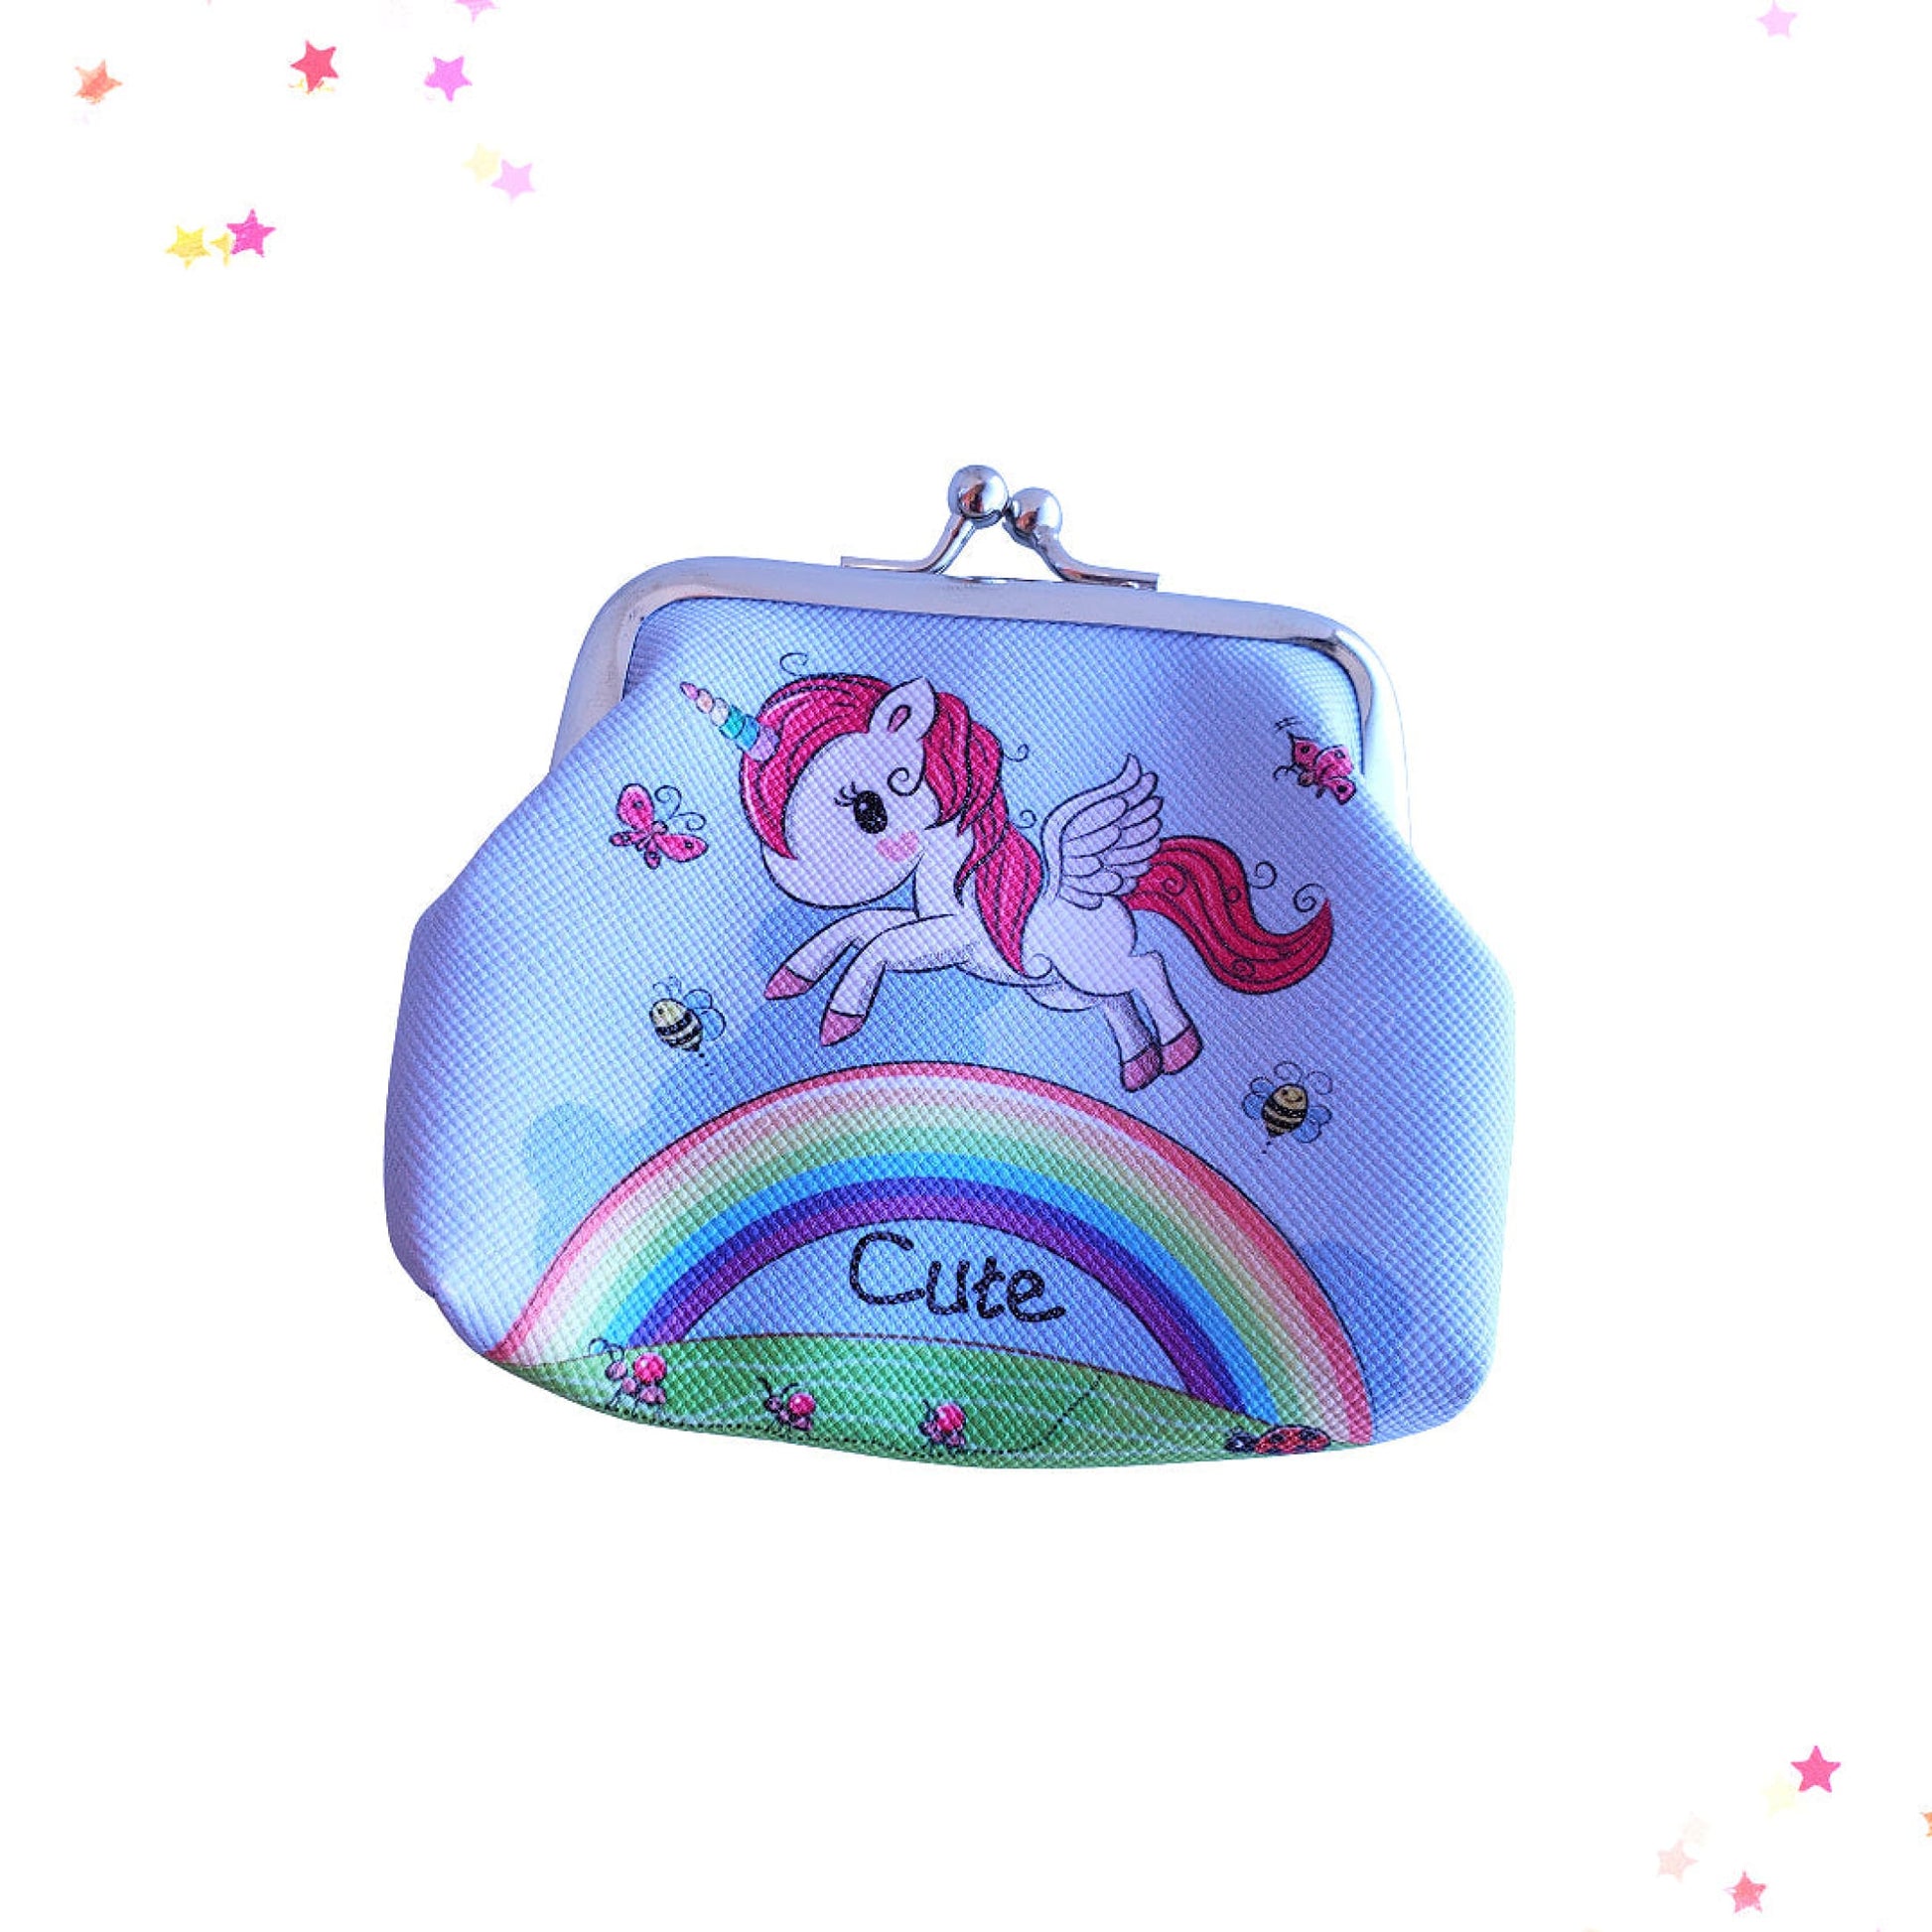 Easy-Open Unicorn Coin Purse in Over the Rainbow from Confetti Kitty, Only 4.99